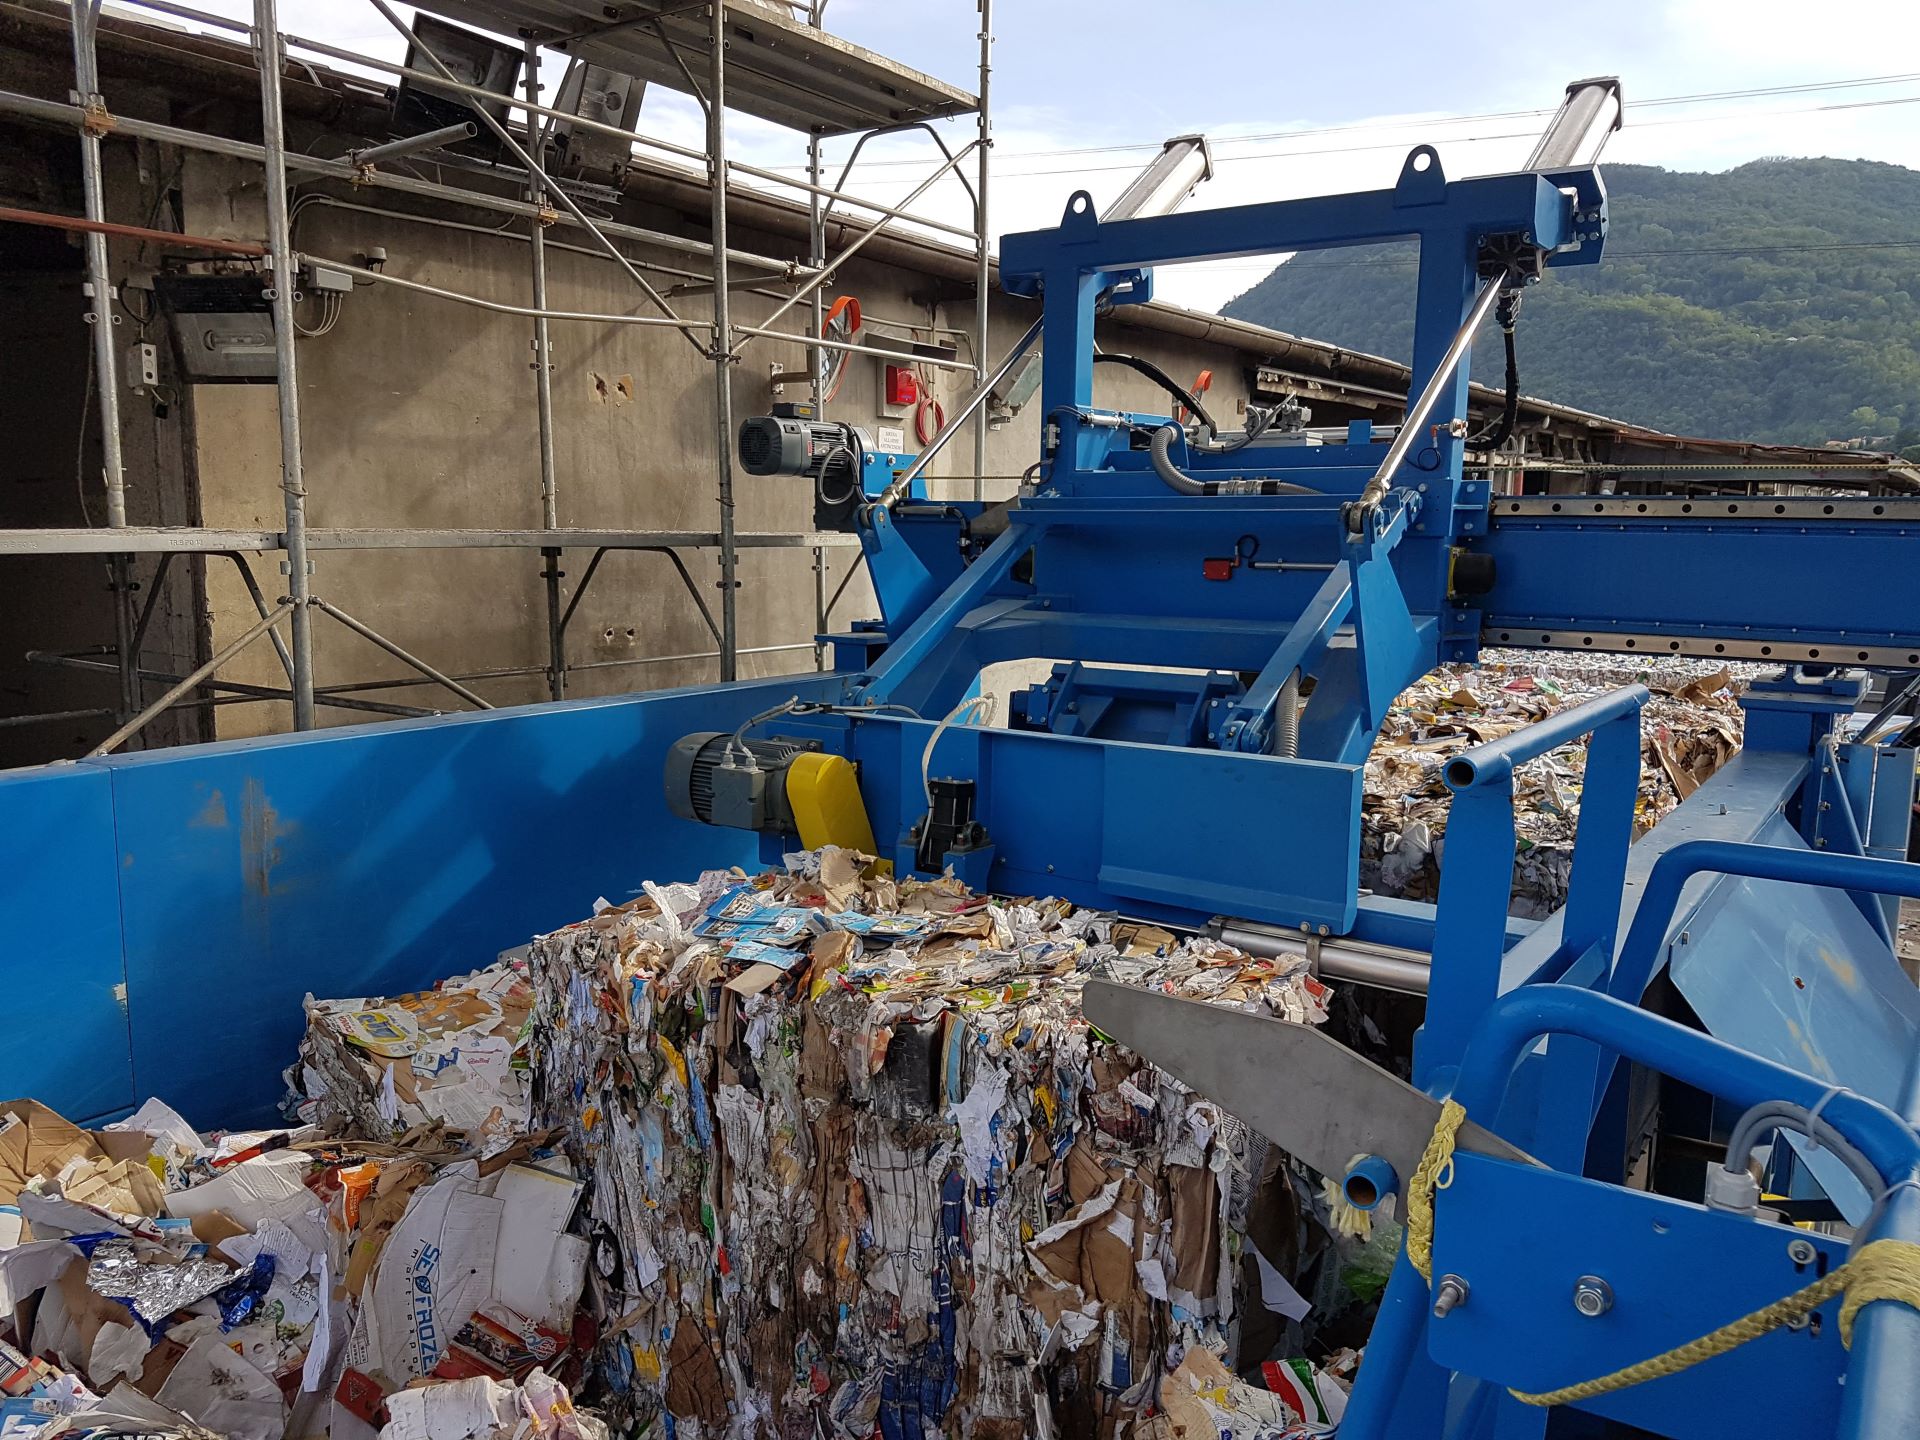 FMW Automatic Wastepaper Bale Dewiring Extractor in Action